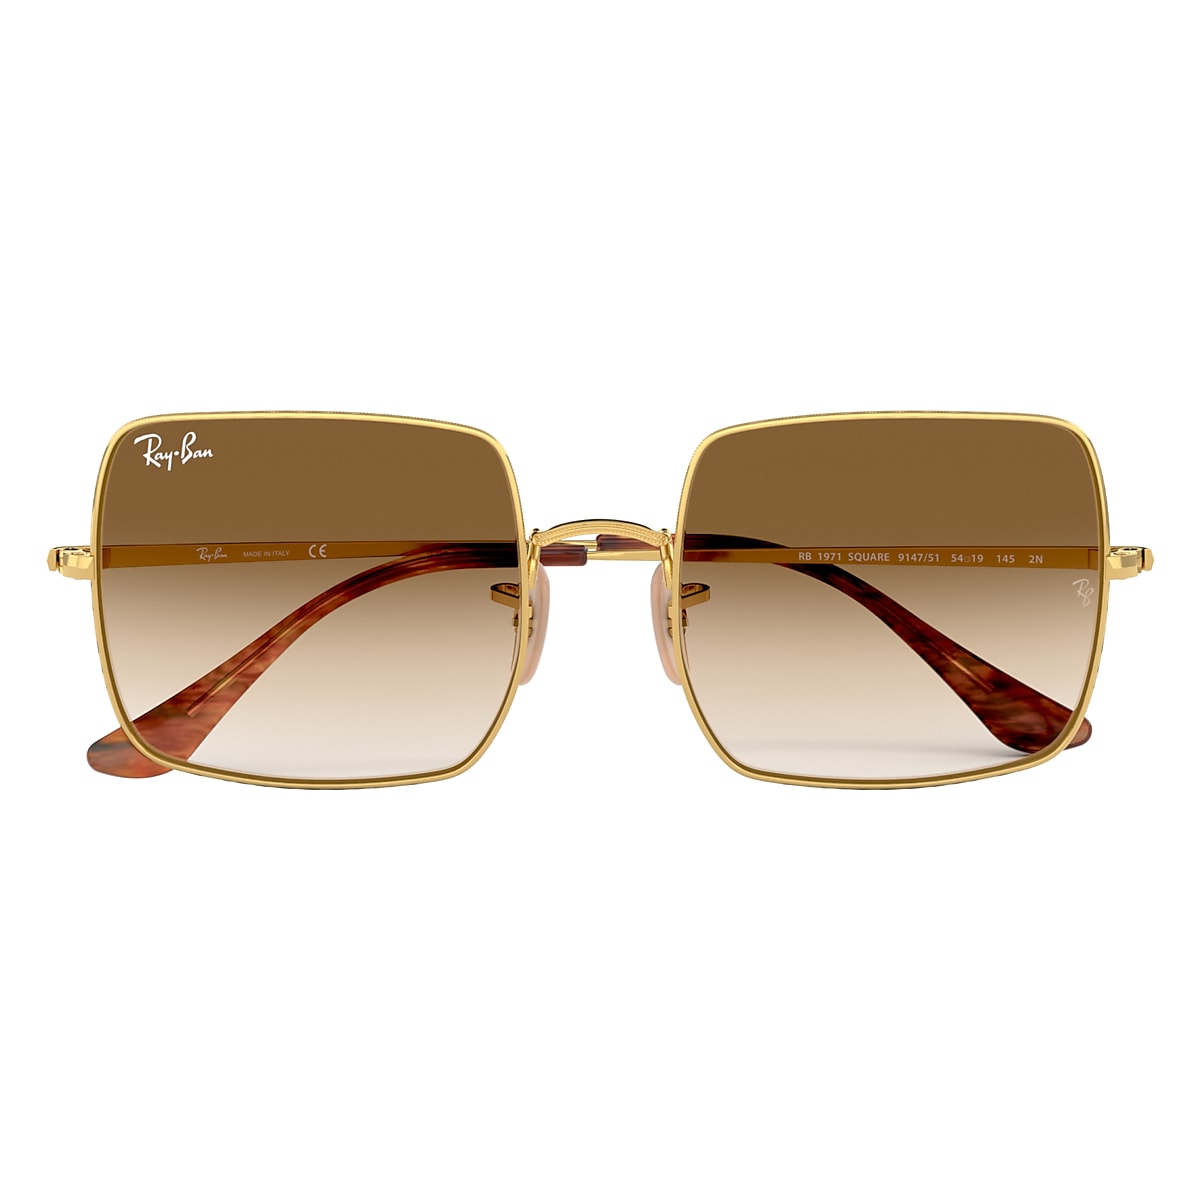 Ray-Ban Sunglasses Square 1971 Classic Gold Frame Brown Lenses